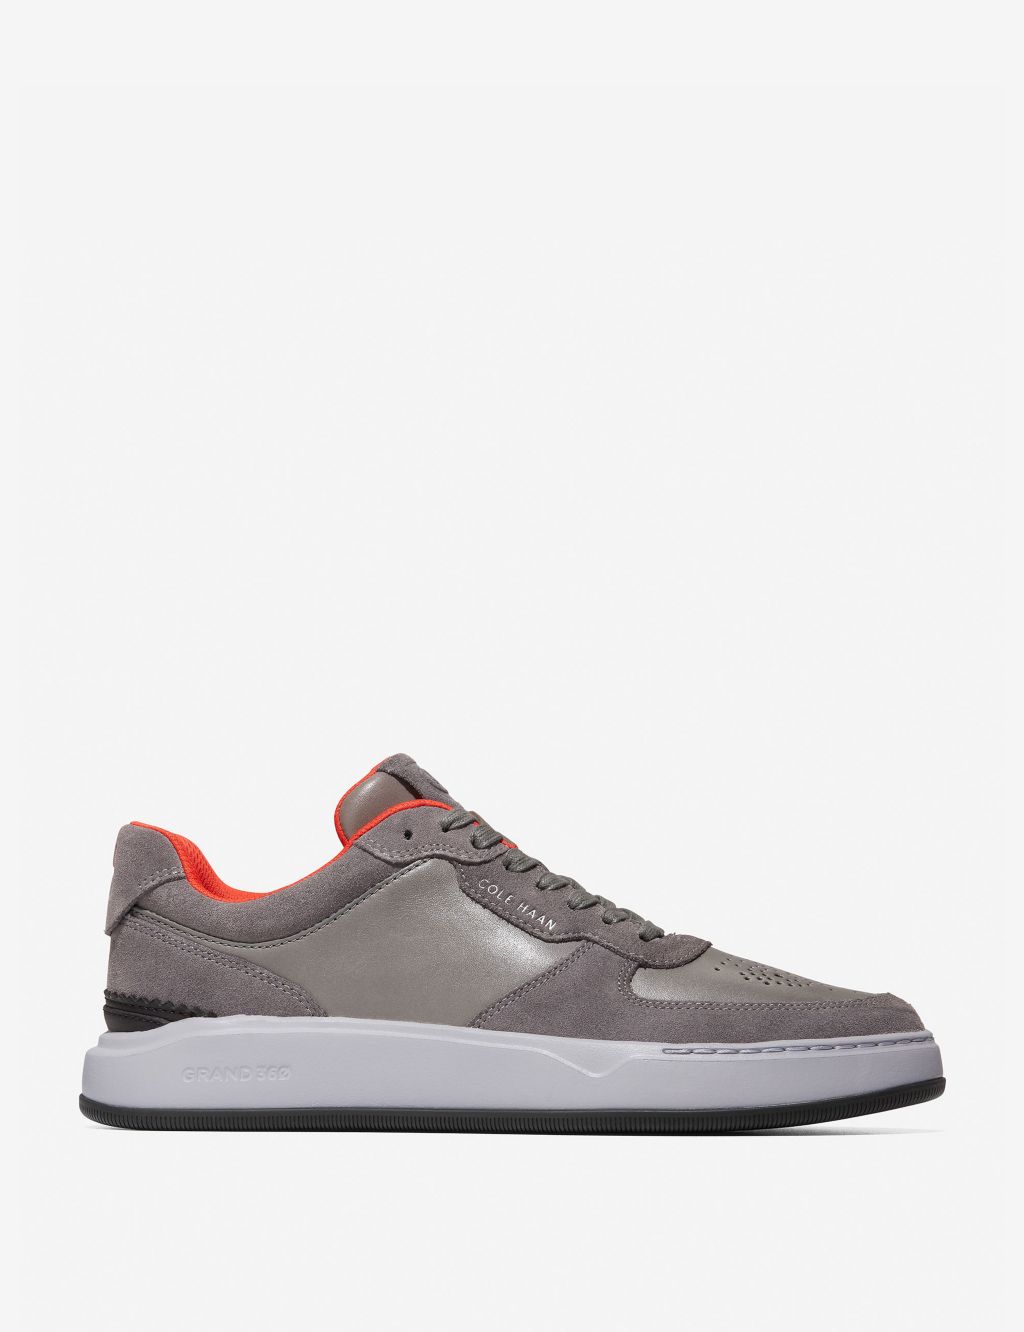 Grandpro Crossover Leather Lace Up Trainers | Cole Haan | M&S